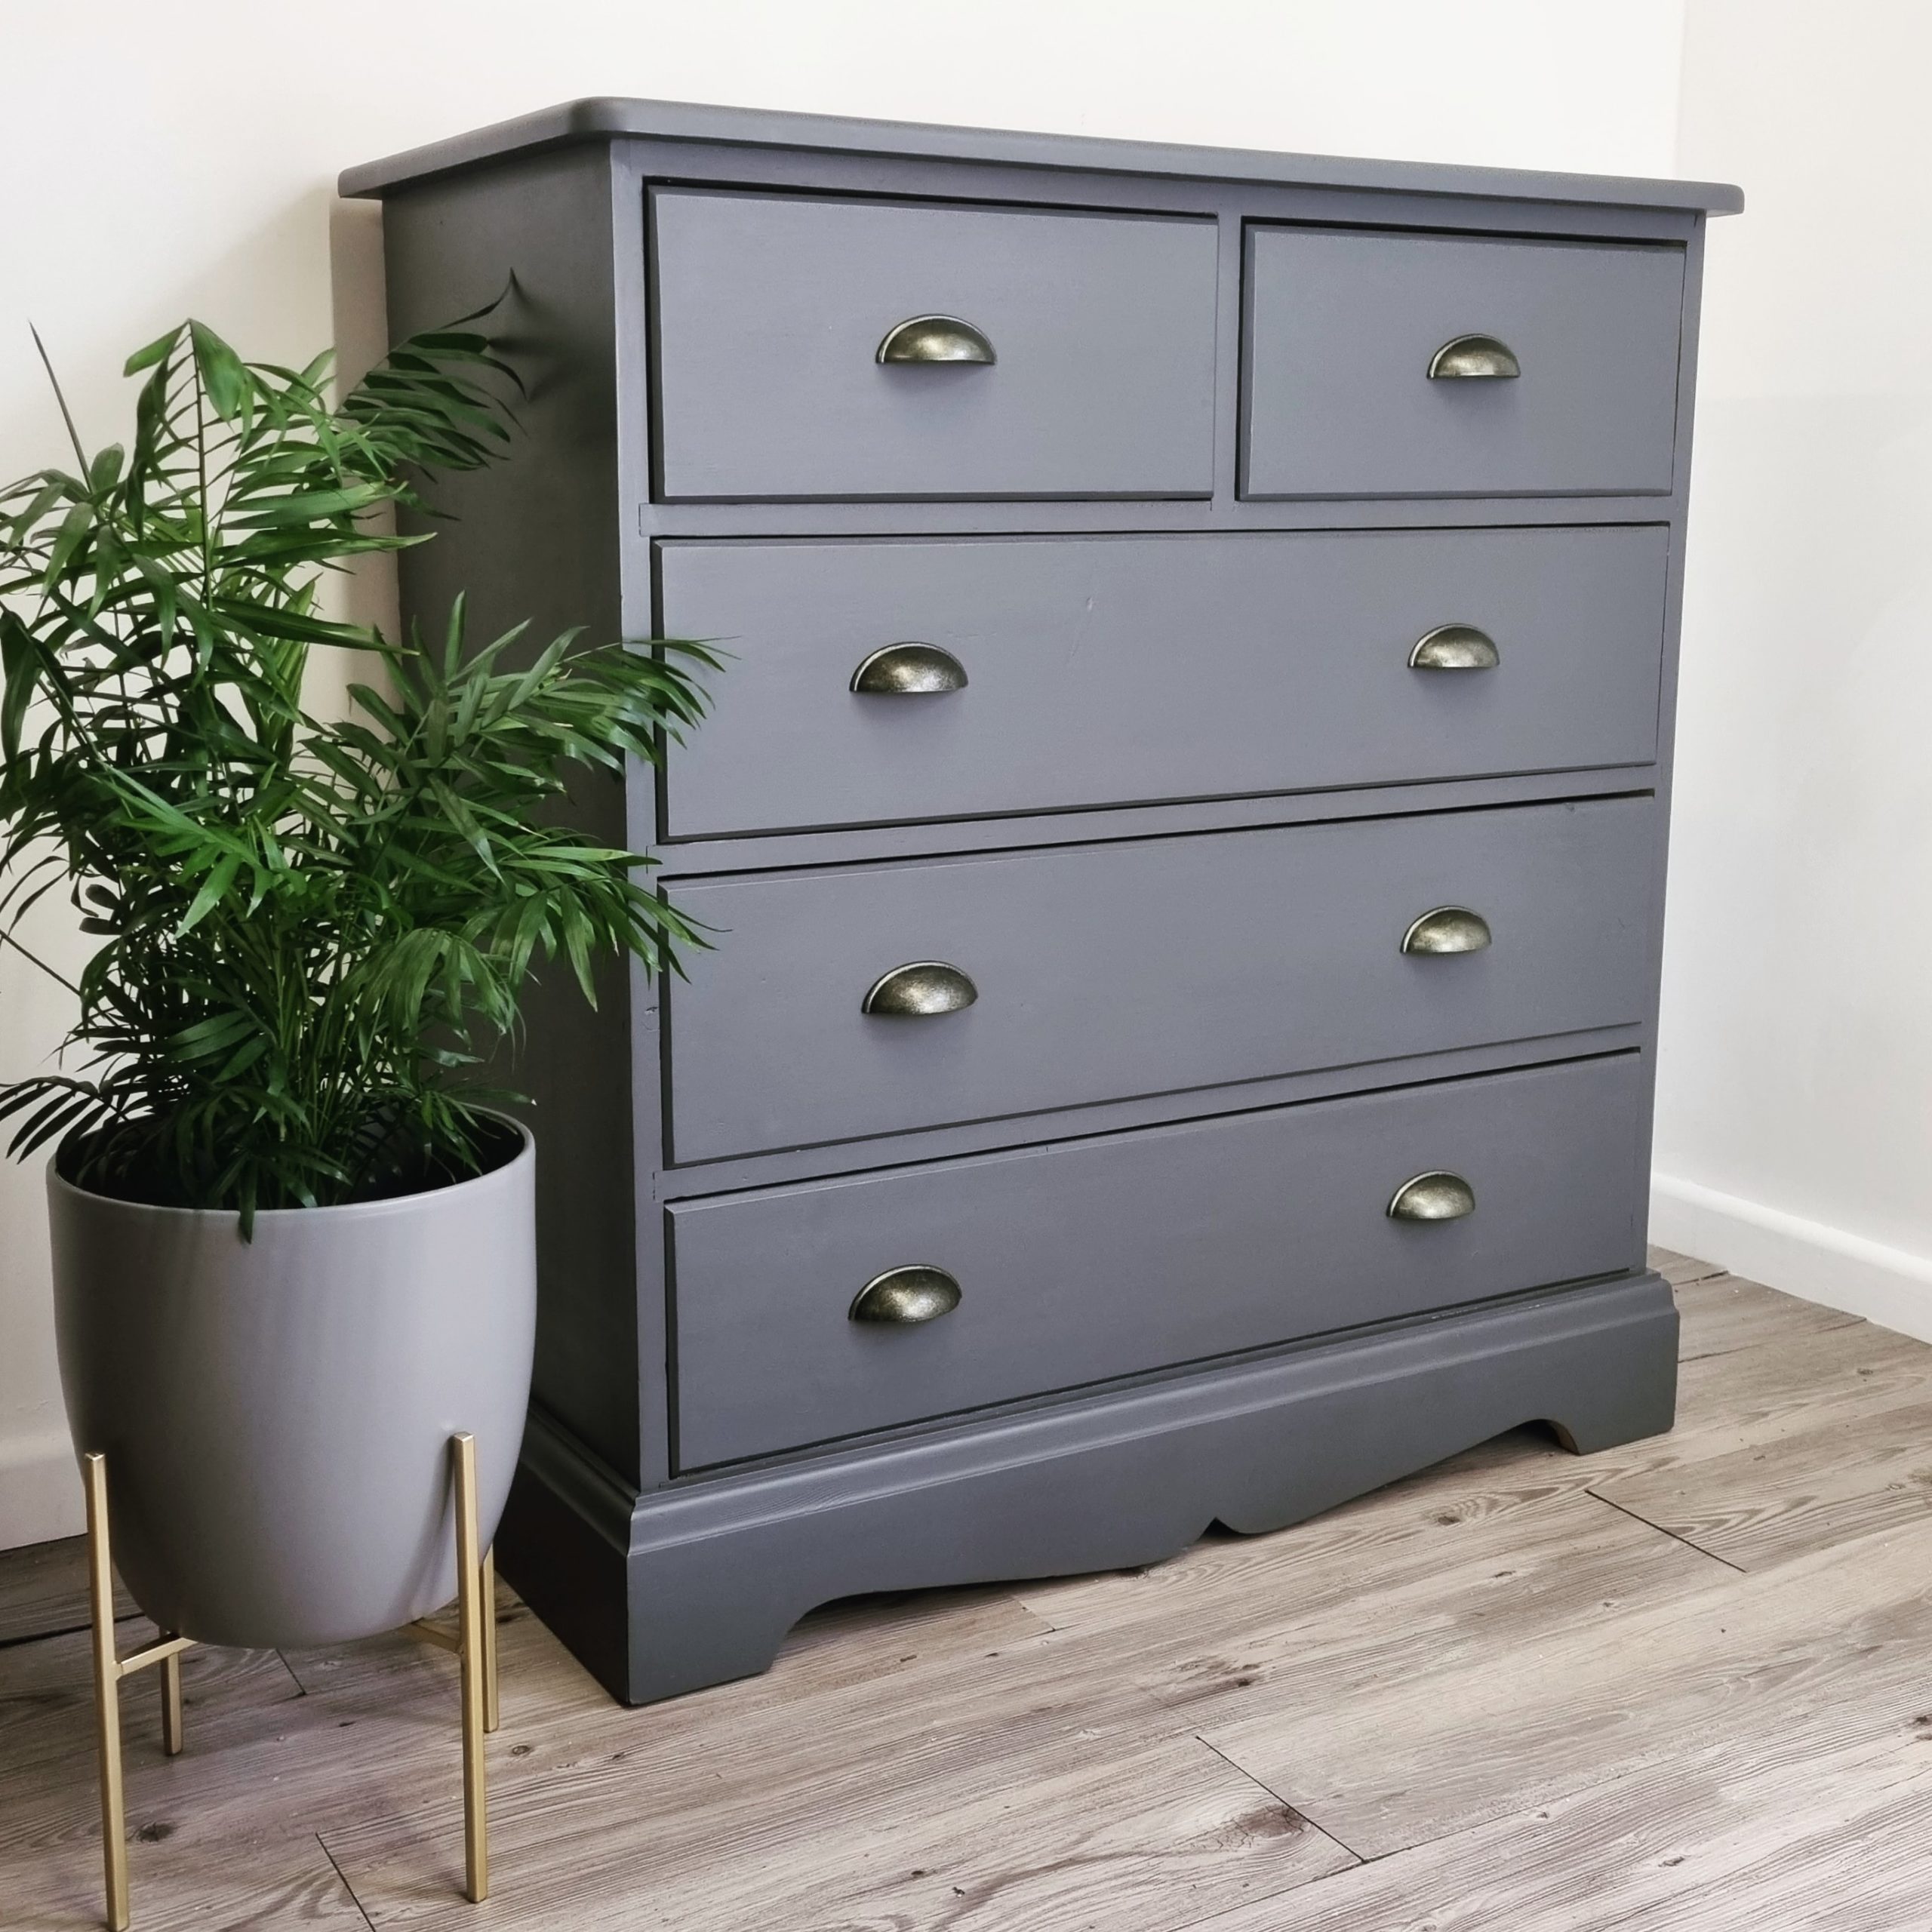 Slate grey painted chest of drawers